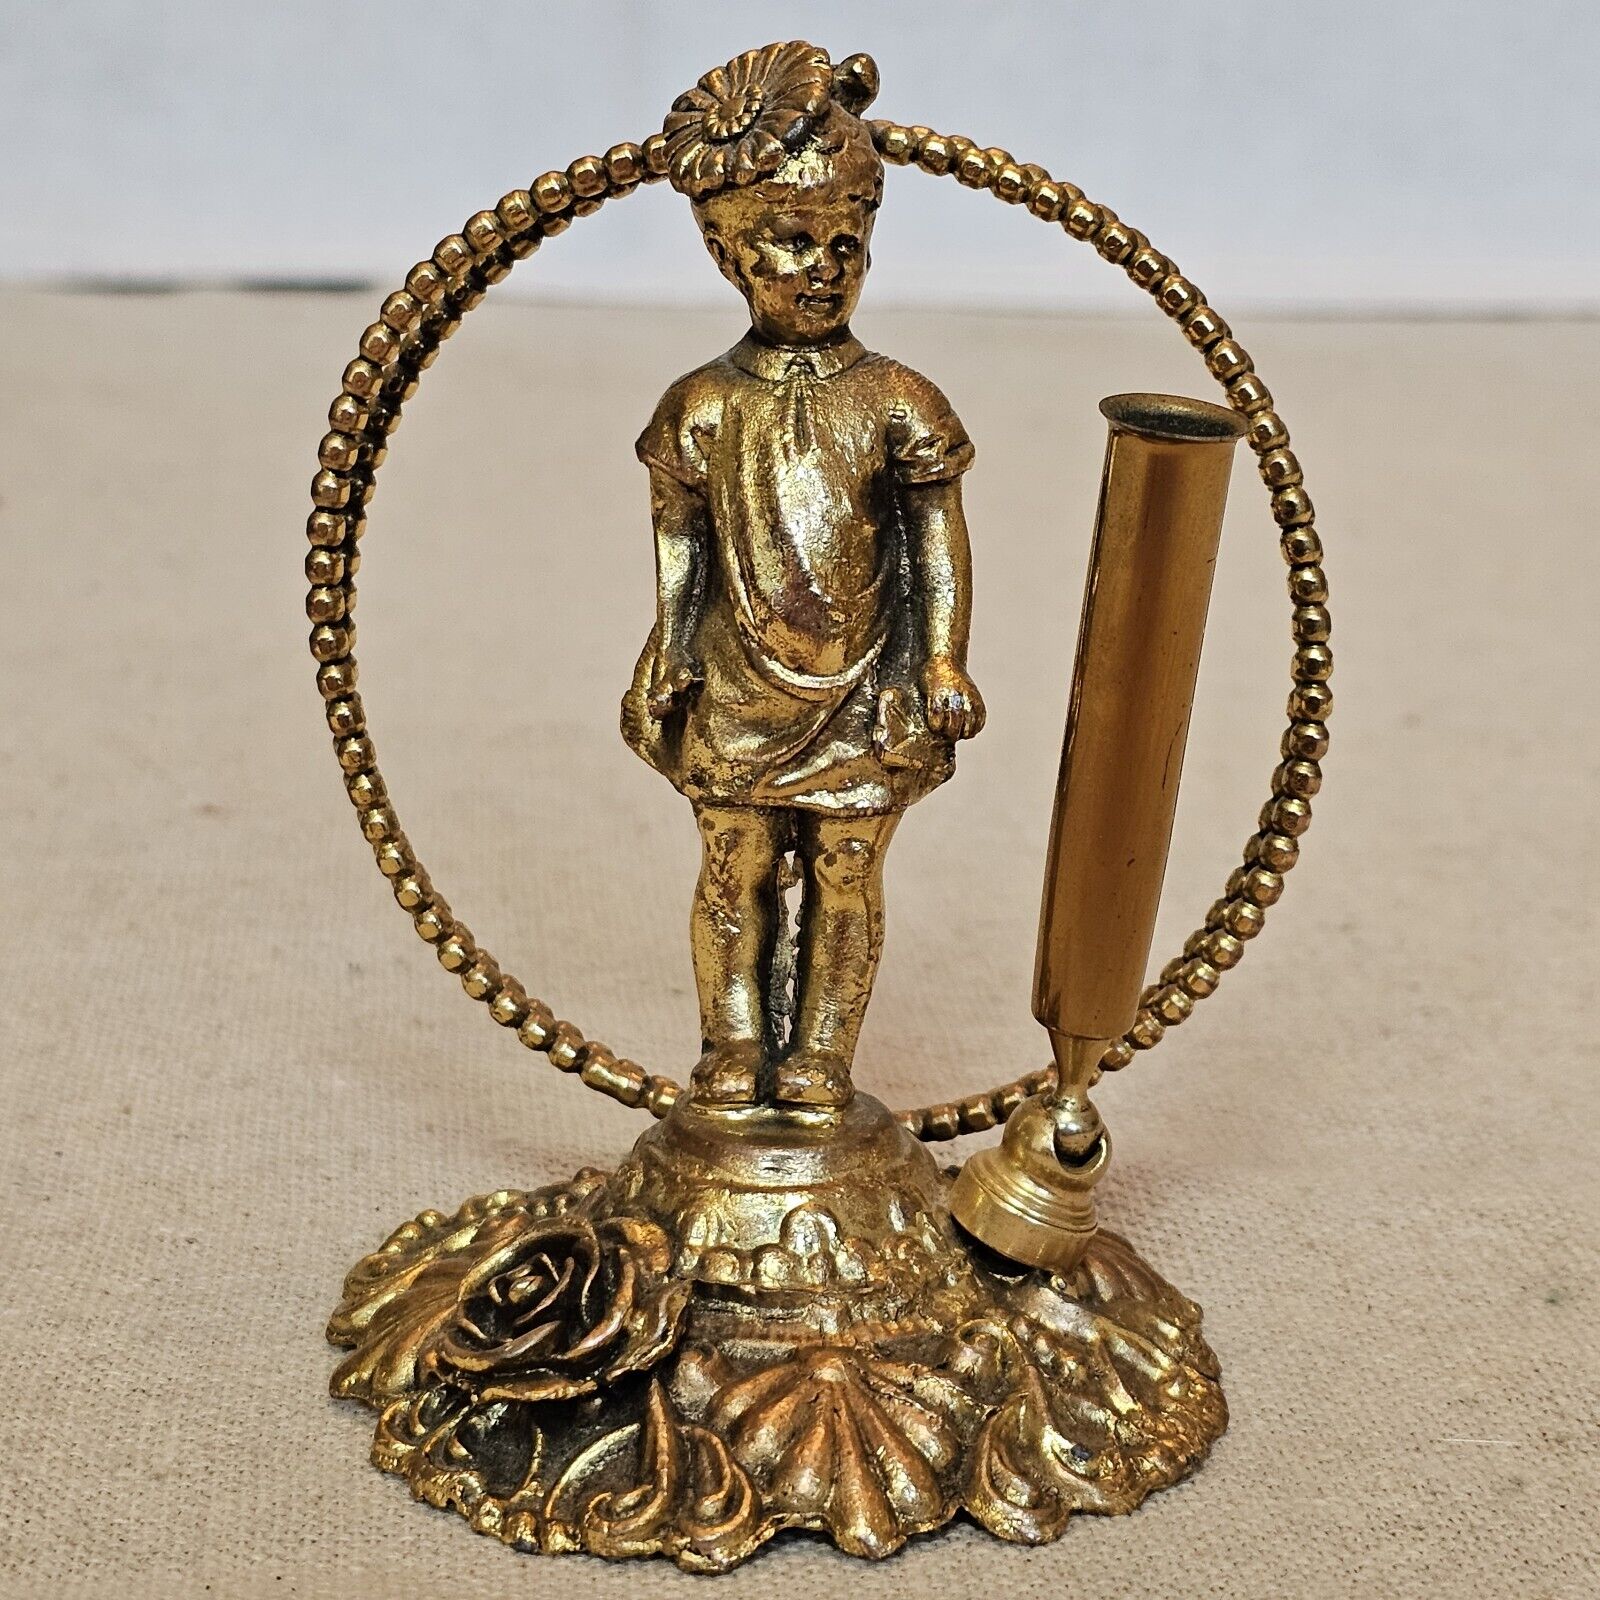 Antique Brass Victorian Girl Large Flower In Hair Fountain Pen Ink Well Holder